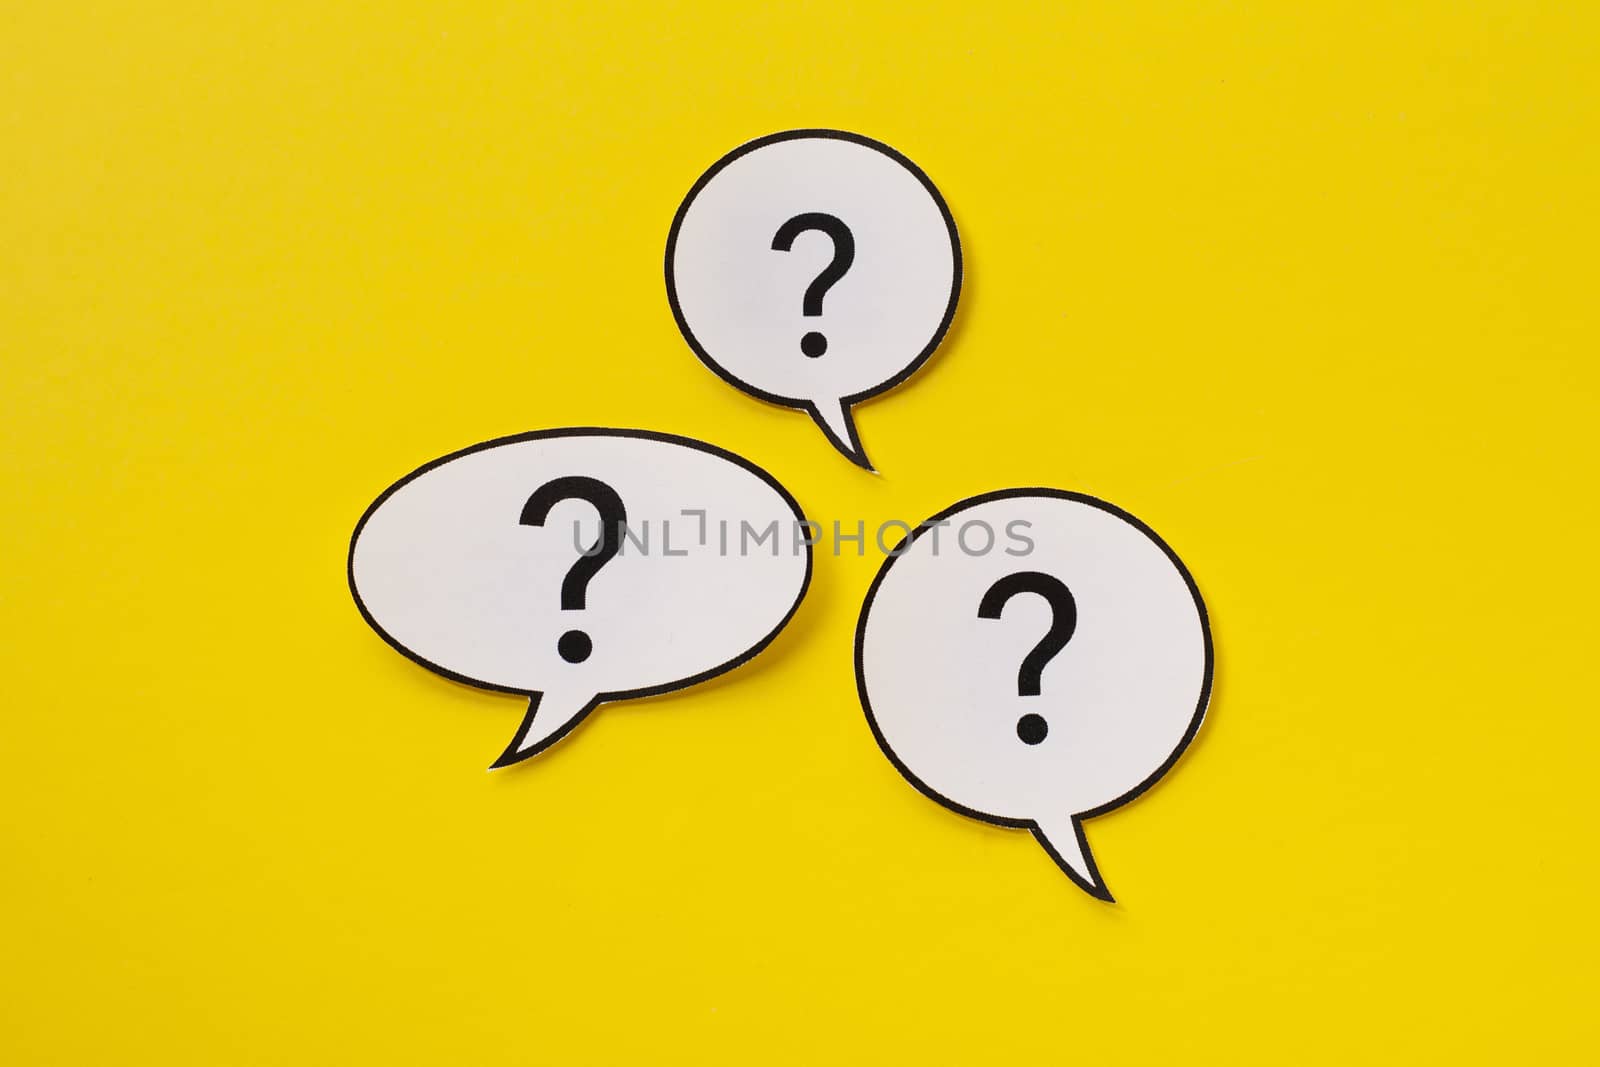 Three different shaped speech bubbles with question marks inside over a bright yellow background arrange in the centre